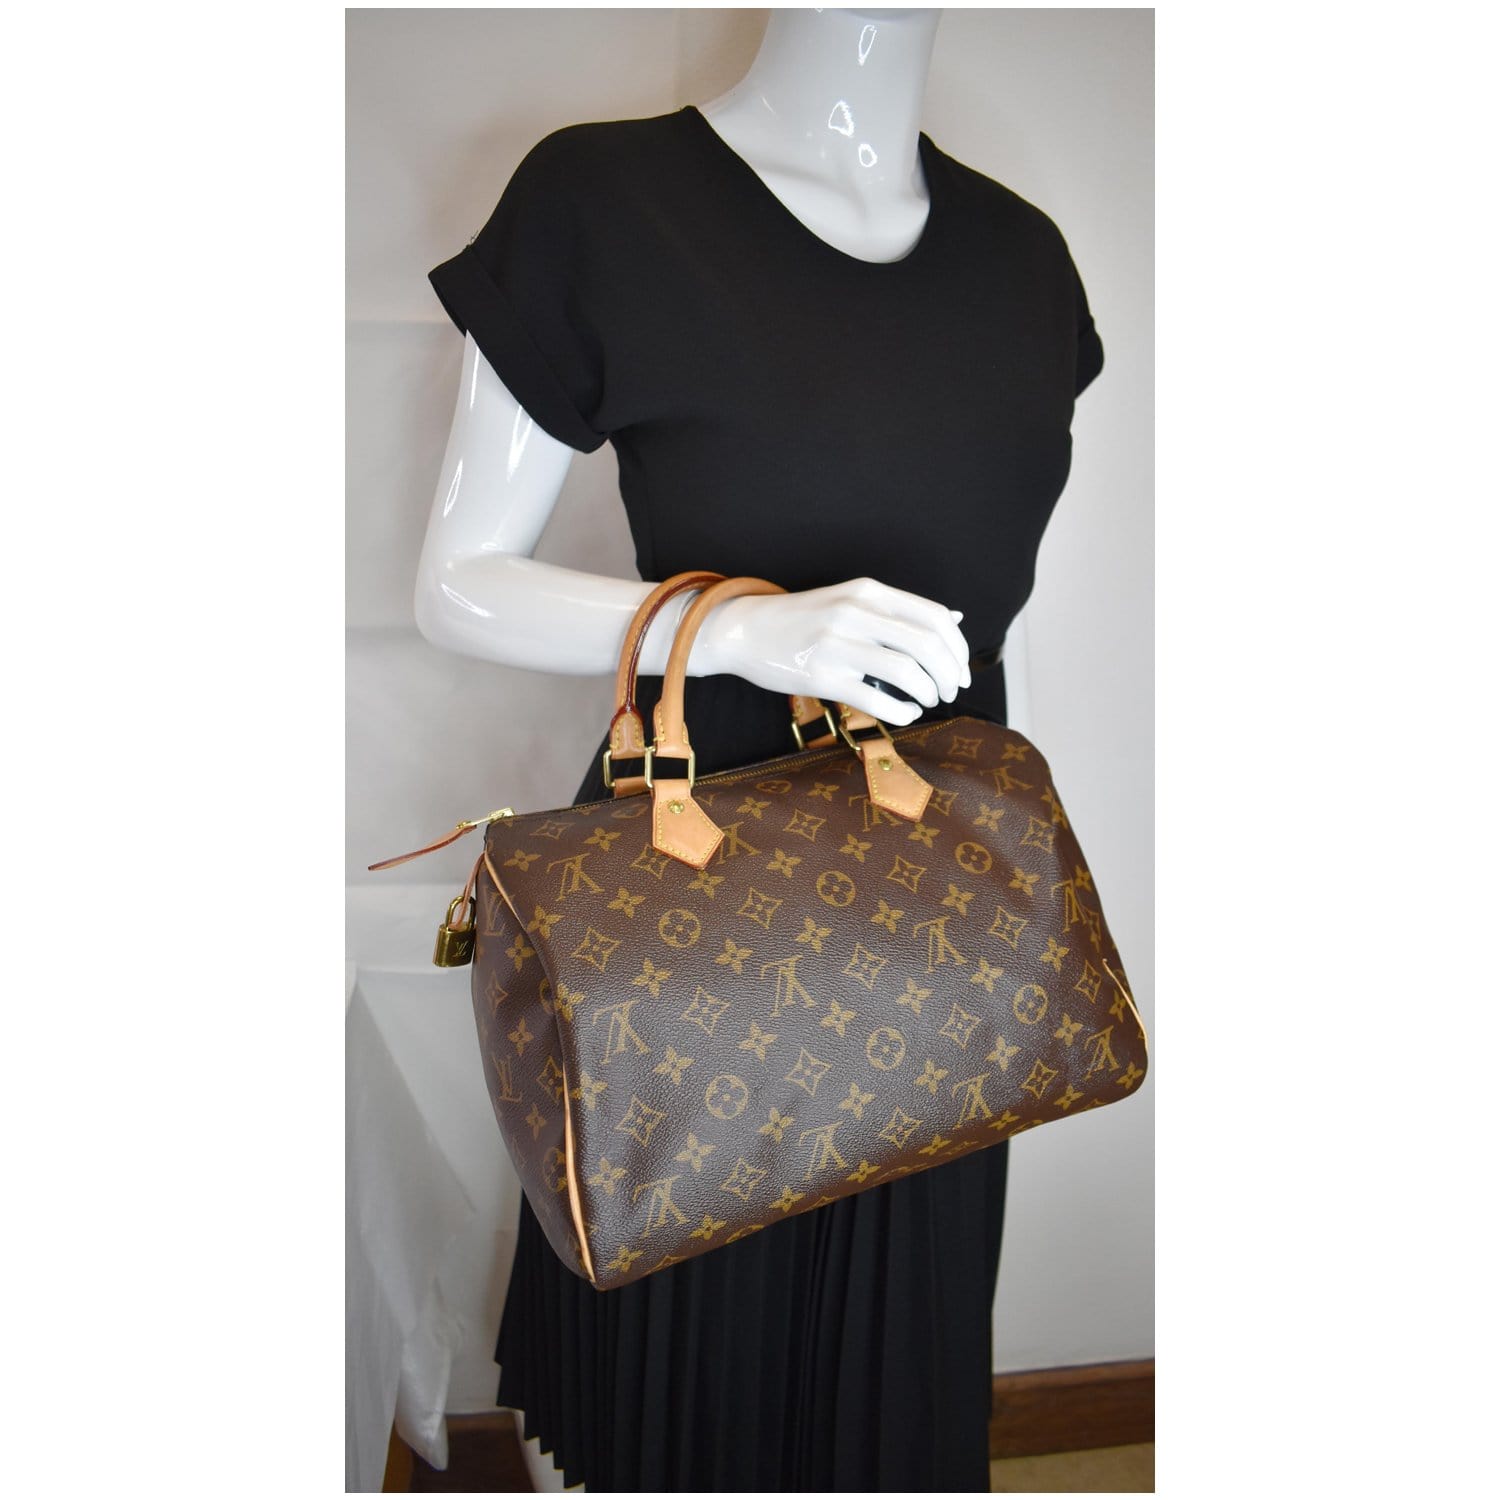 Louis Vuitton French Company Speedy Shoulder Bag 30 Brown Canvas